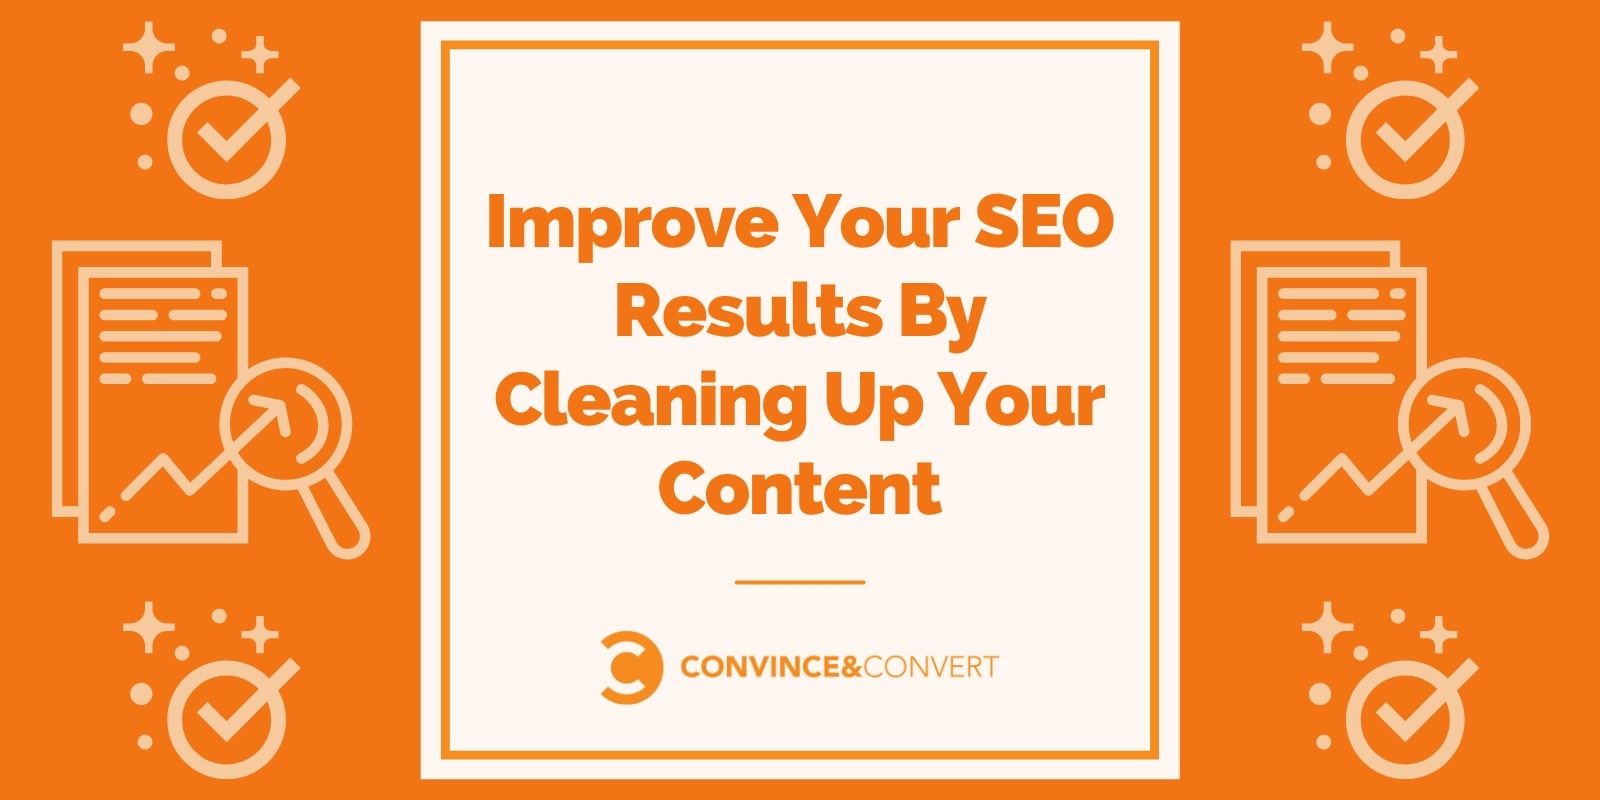 Improve Your SEO Results By Cleaning Up Your Content